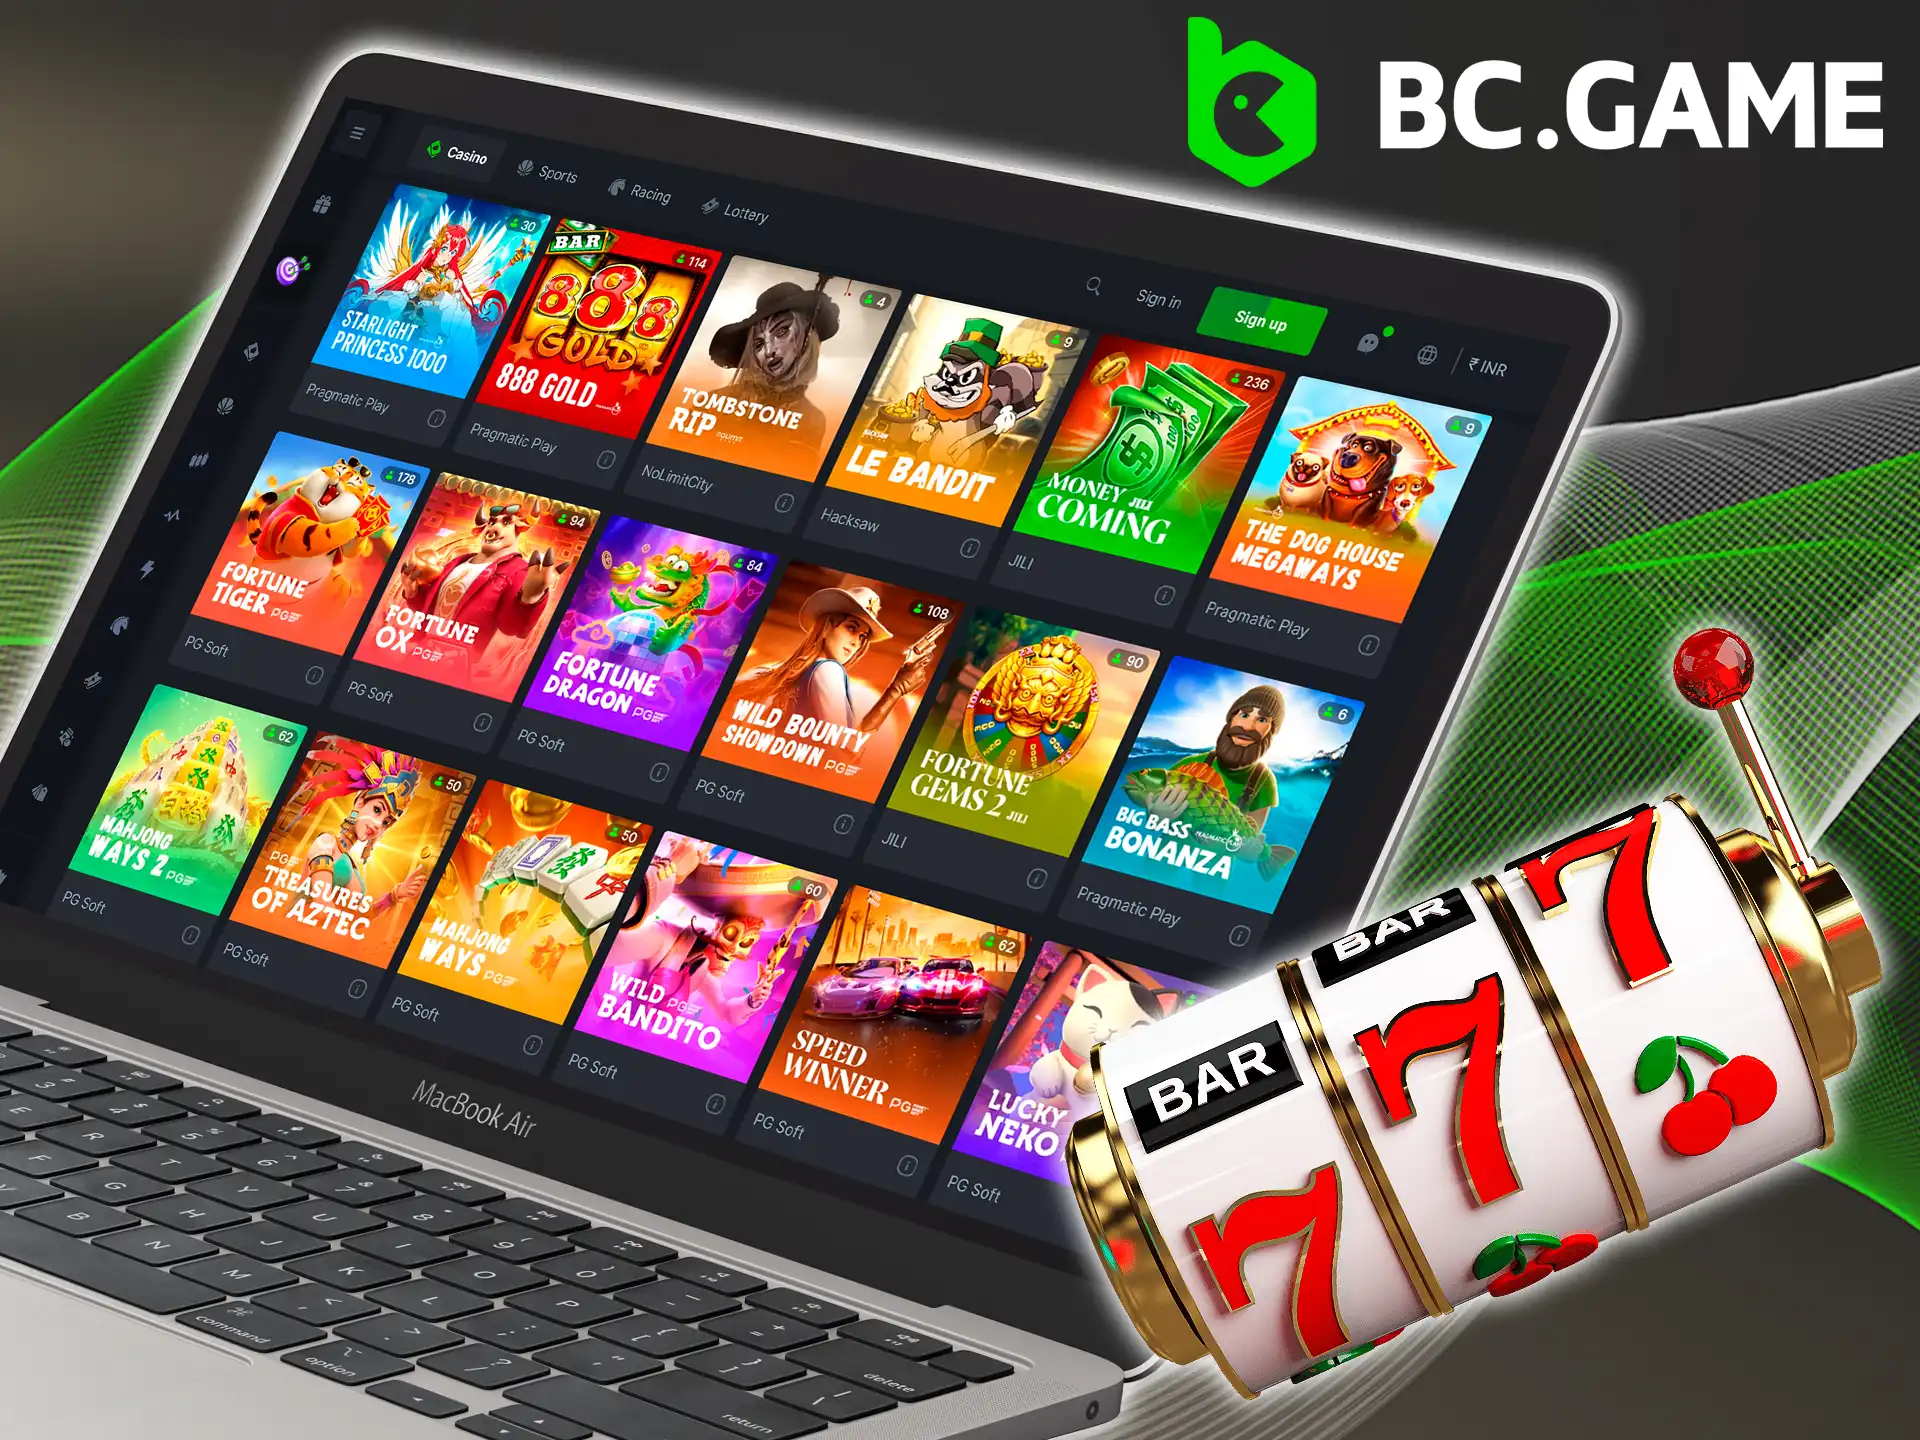 Register, familiarize yourself with the features of each slot and go on a journey with BC Game.